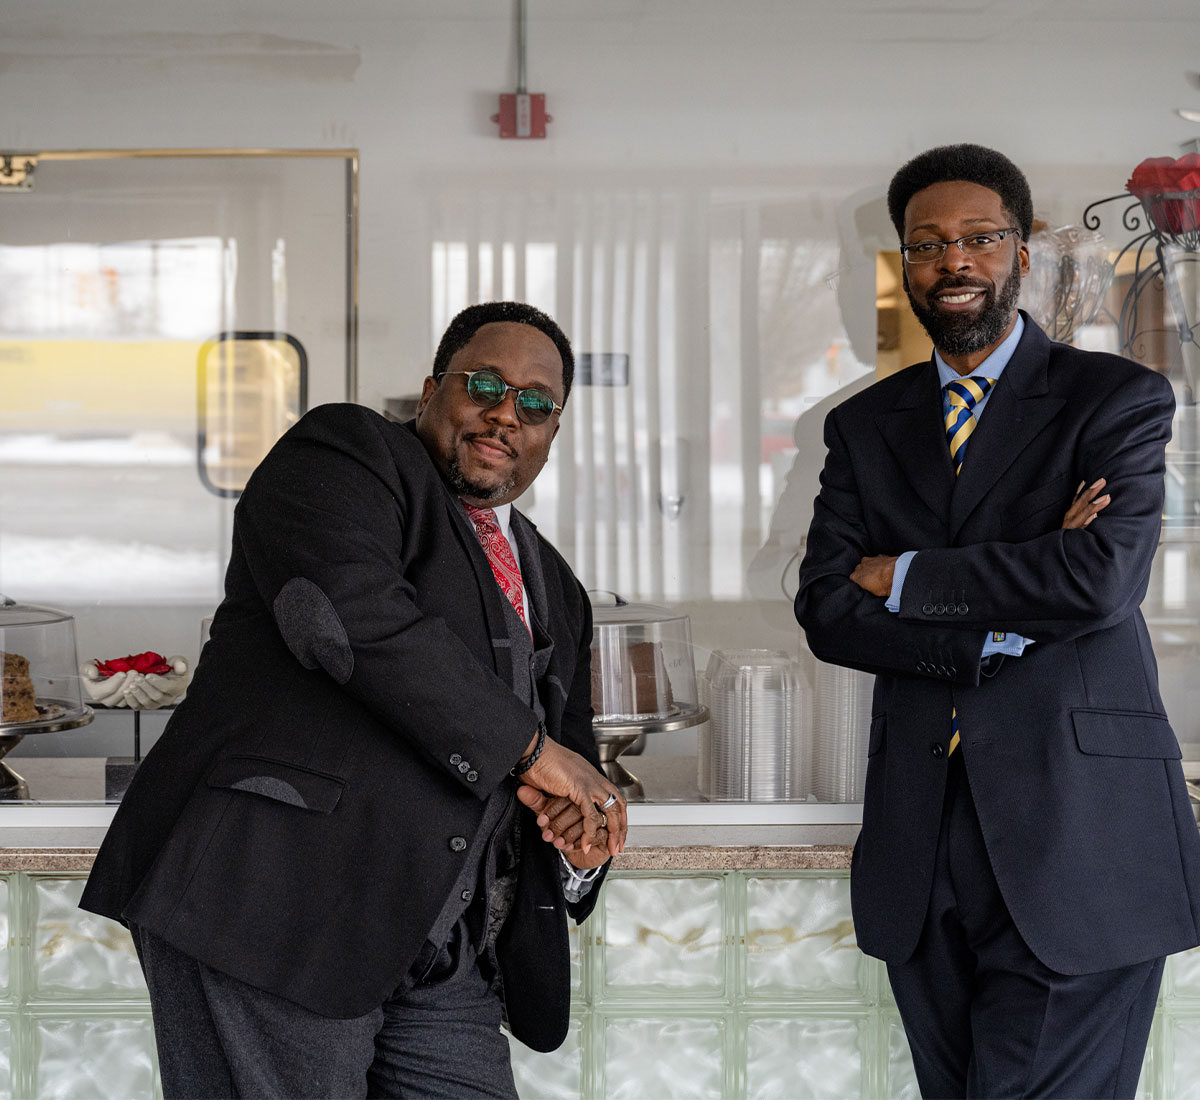 Two Black men in suits standing in a cafe